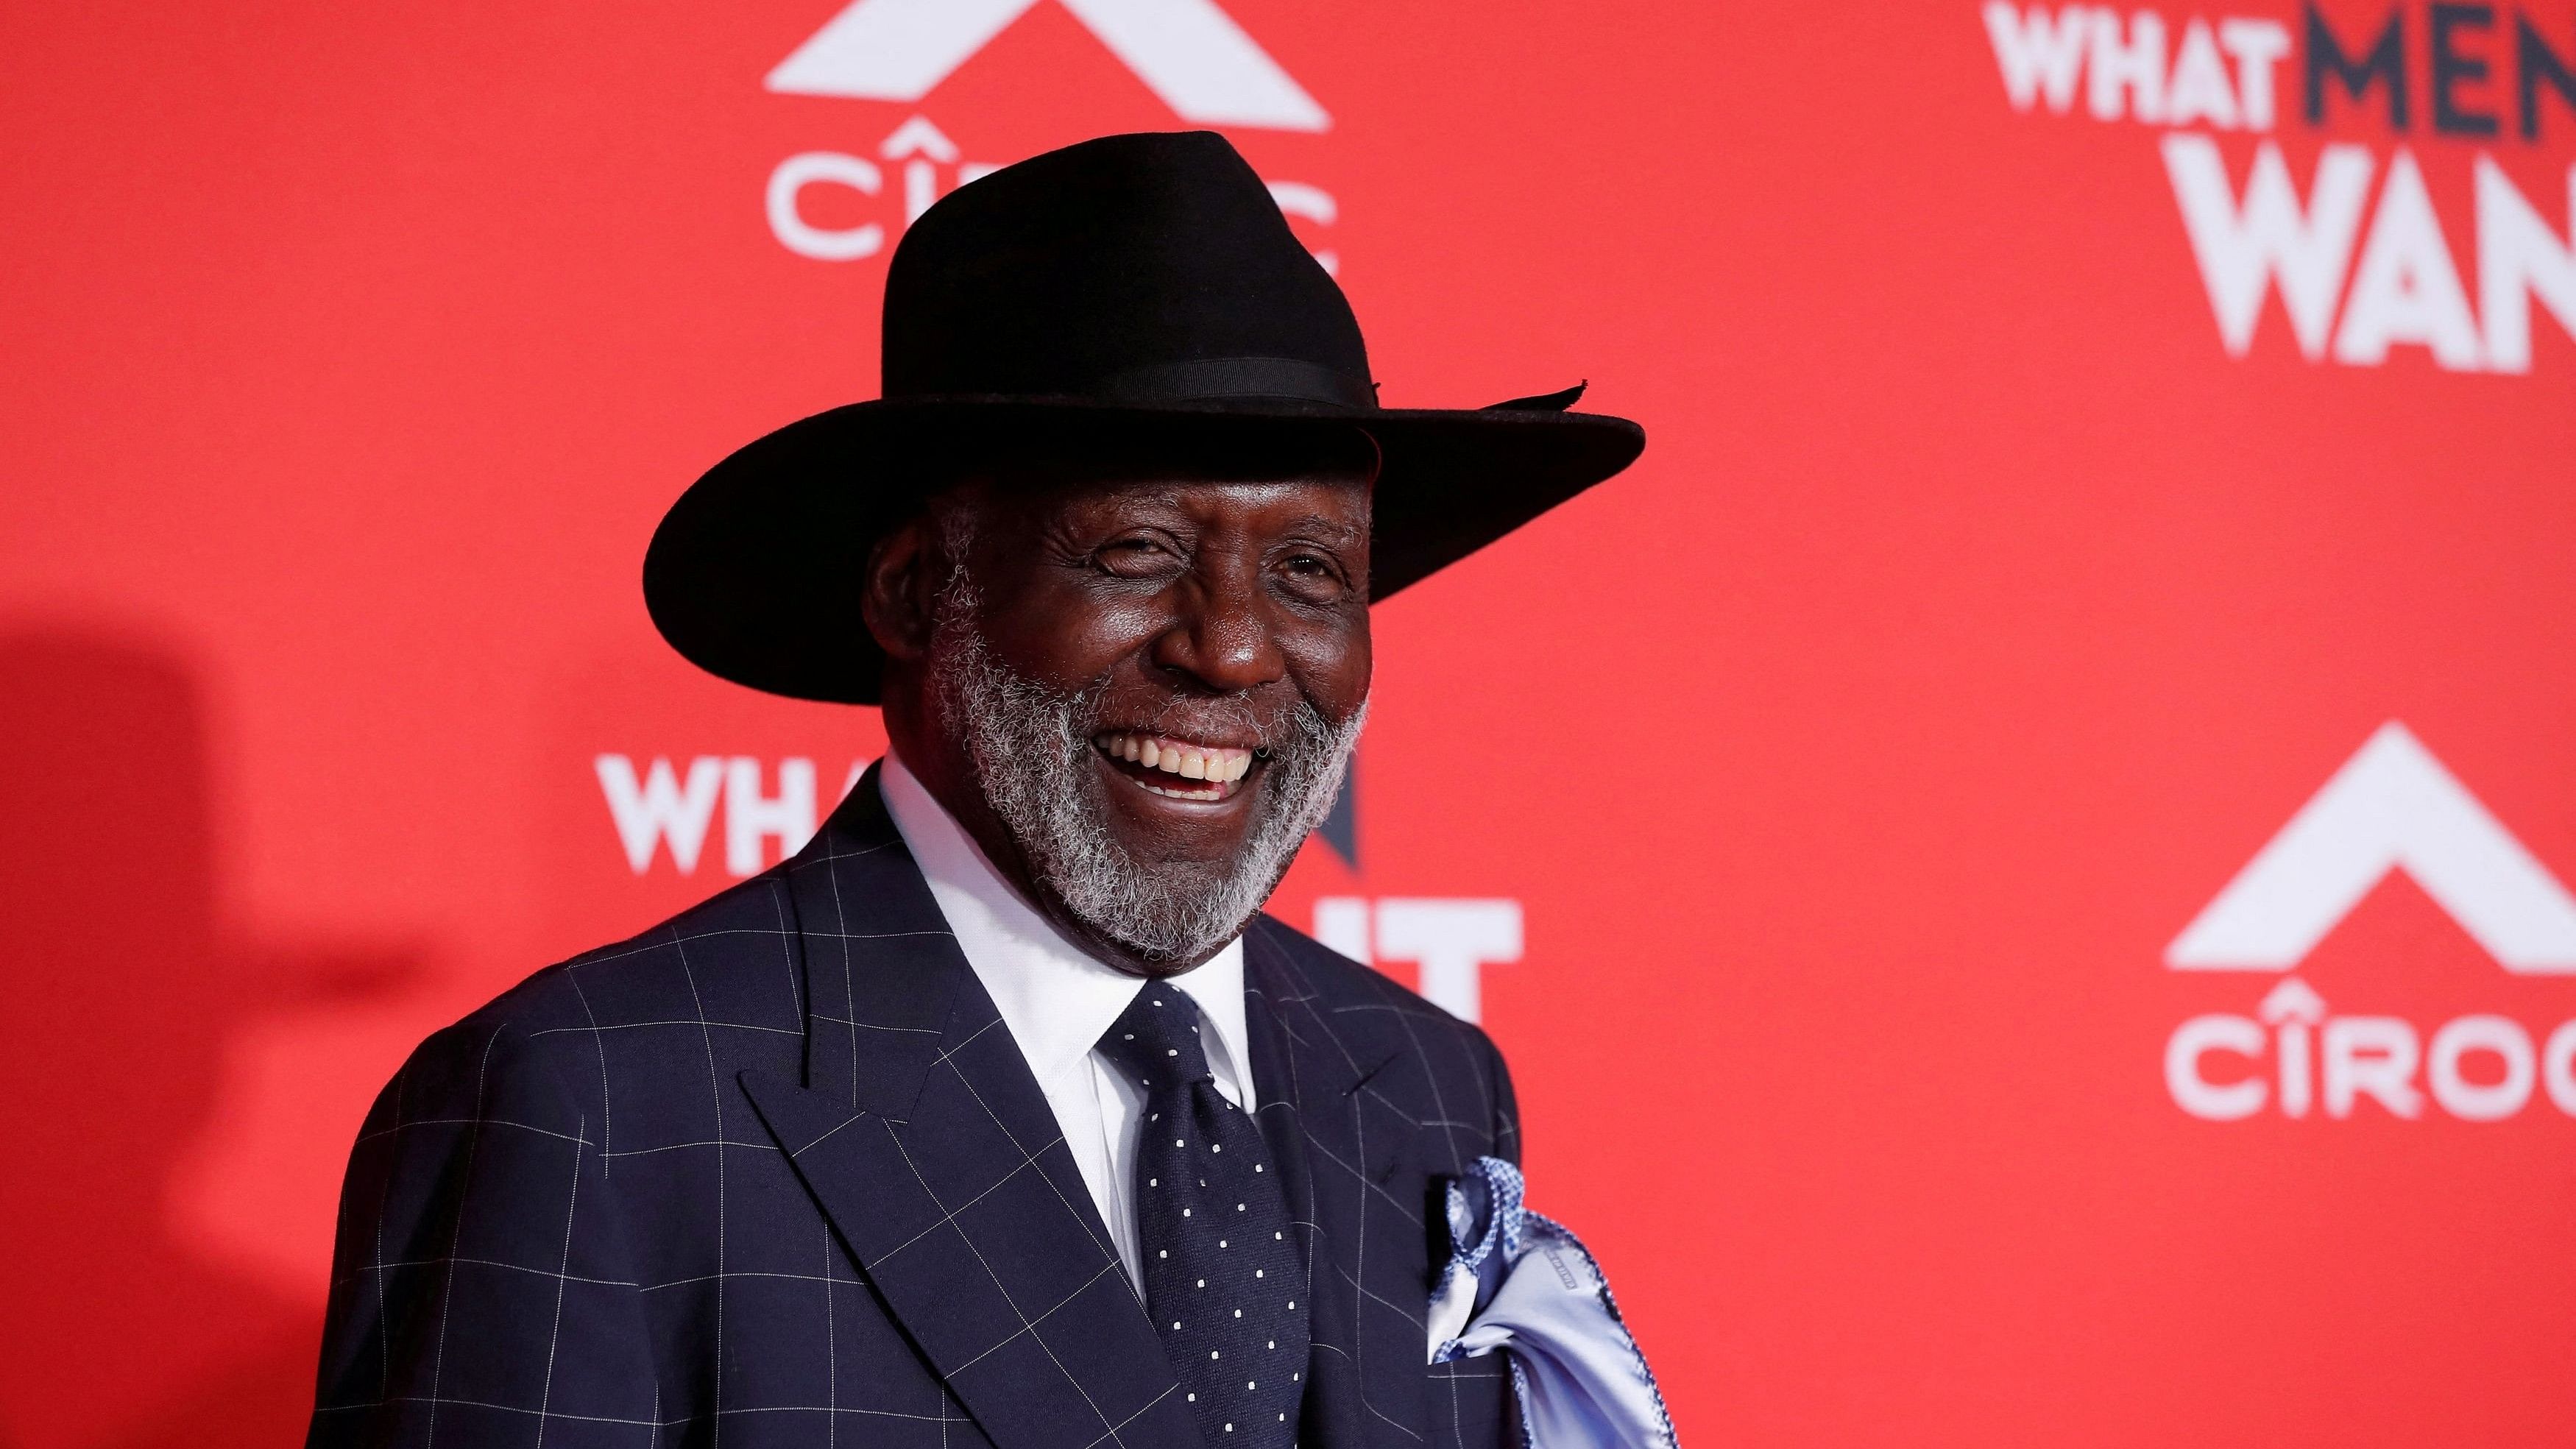 <div class="paragraphs"><p>Cast member Richard Roundtree poses at the premiere of the movie "What Men Want" in Los Angeles, California, US January 28, 2019.</p></div>